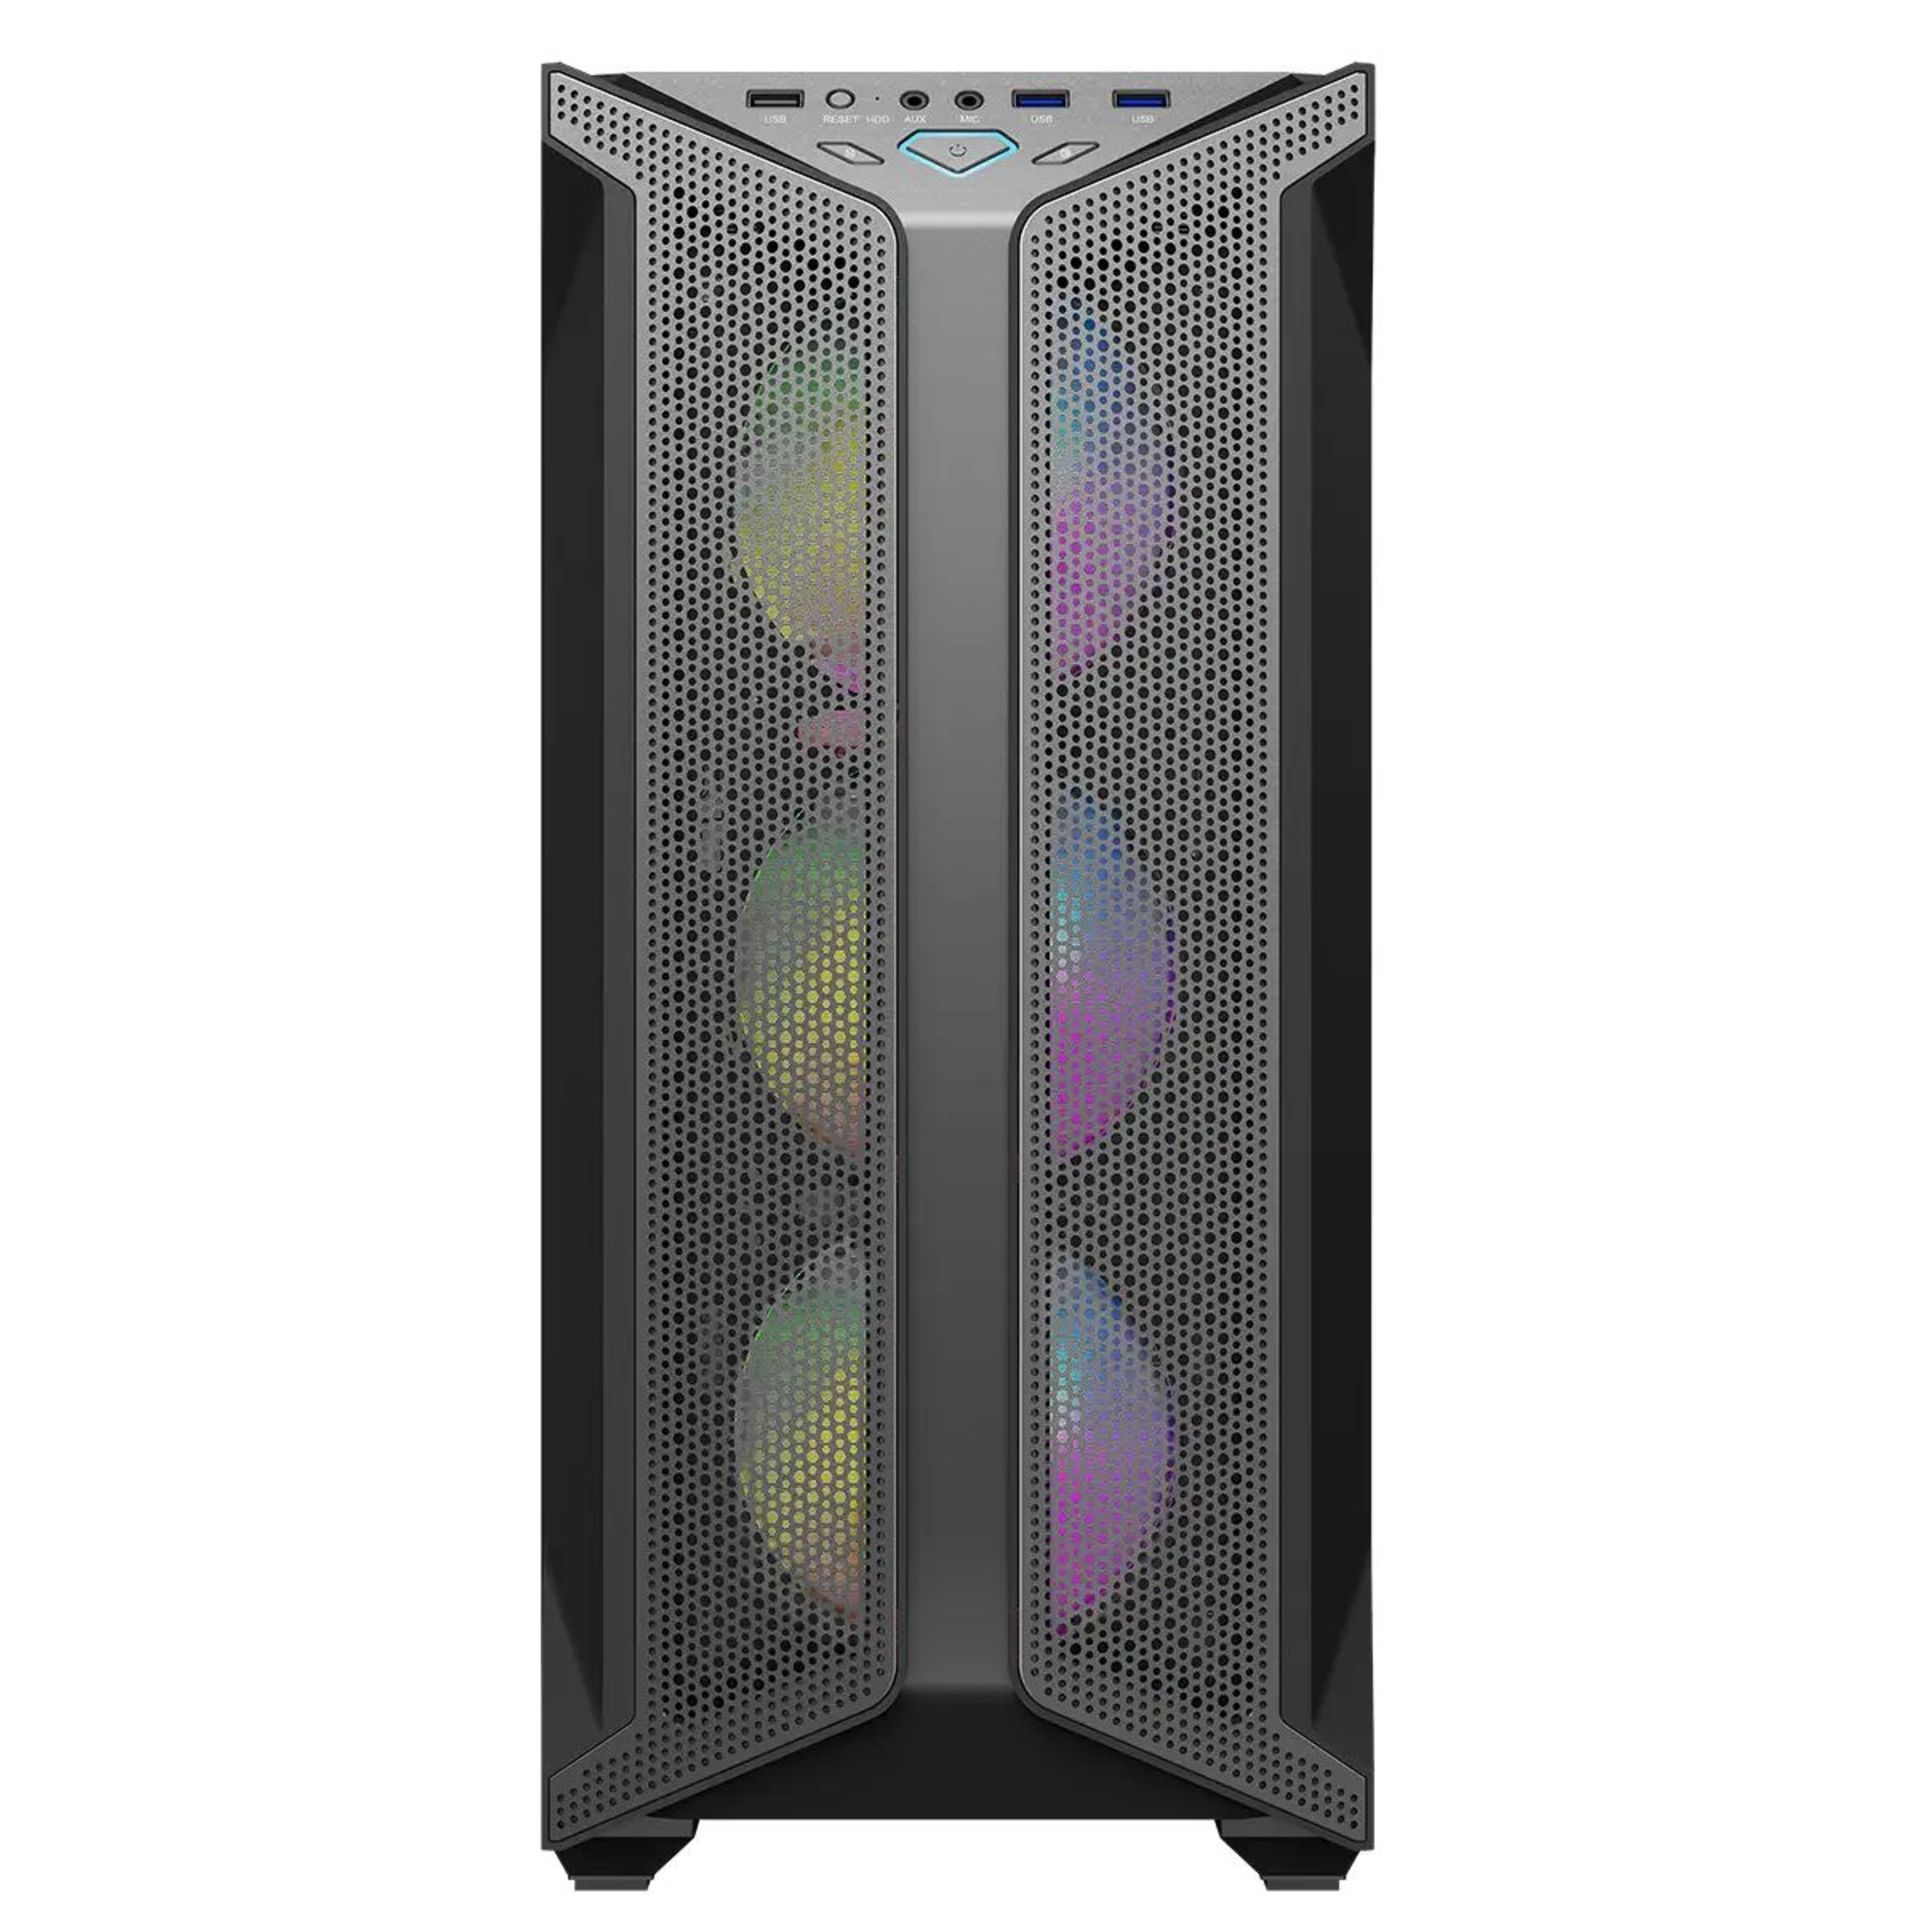 BRAND NEW FACTORY SEALED GAMEMAX Brufen Mid -Tower ATX ARGB PC Gaming Case. RRP £74.99. (EBR1). - Image 2 of 5